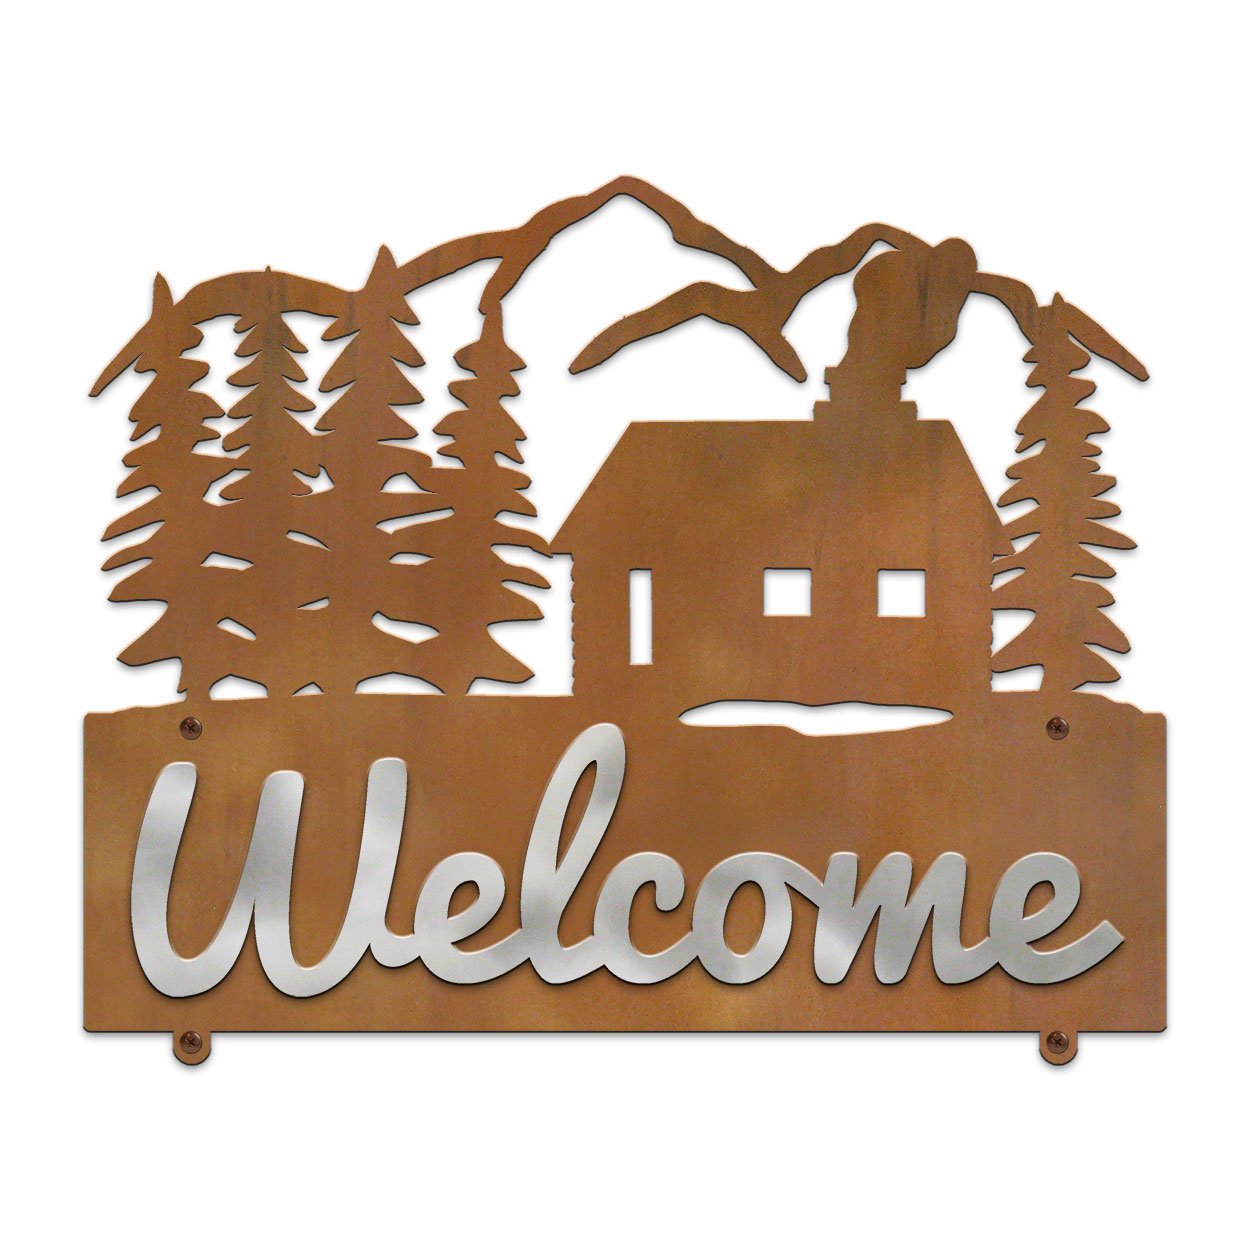 607078 - Cabin in the Woods Design Horizontal Metal Welcome Wall Plaque